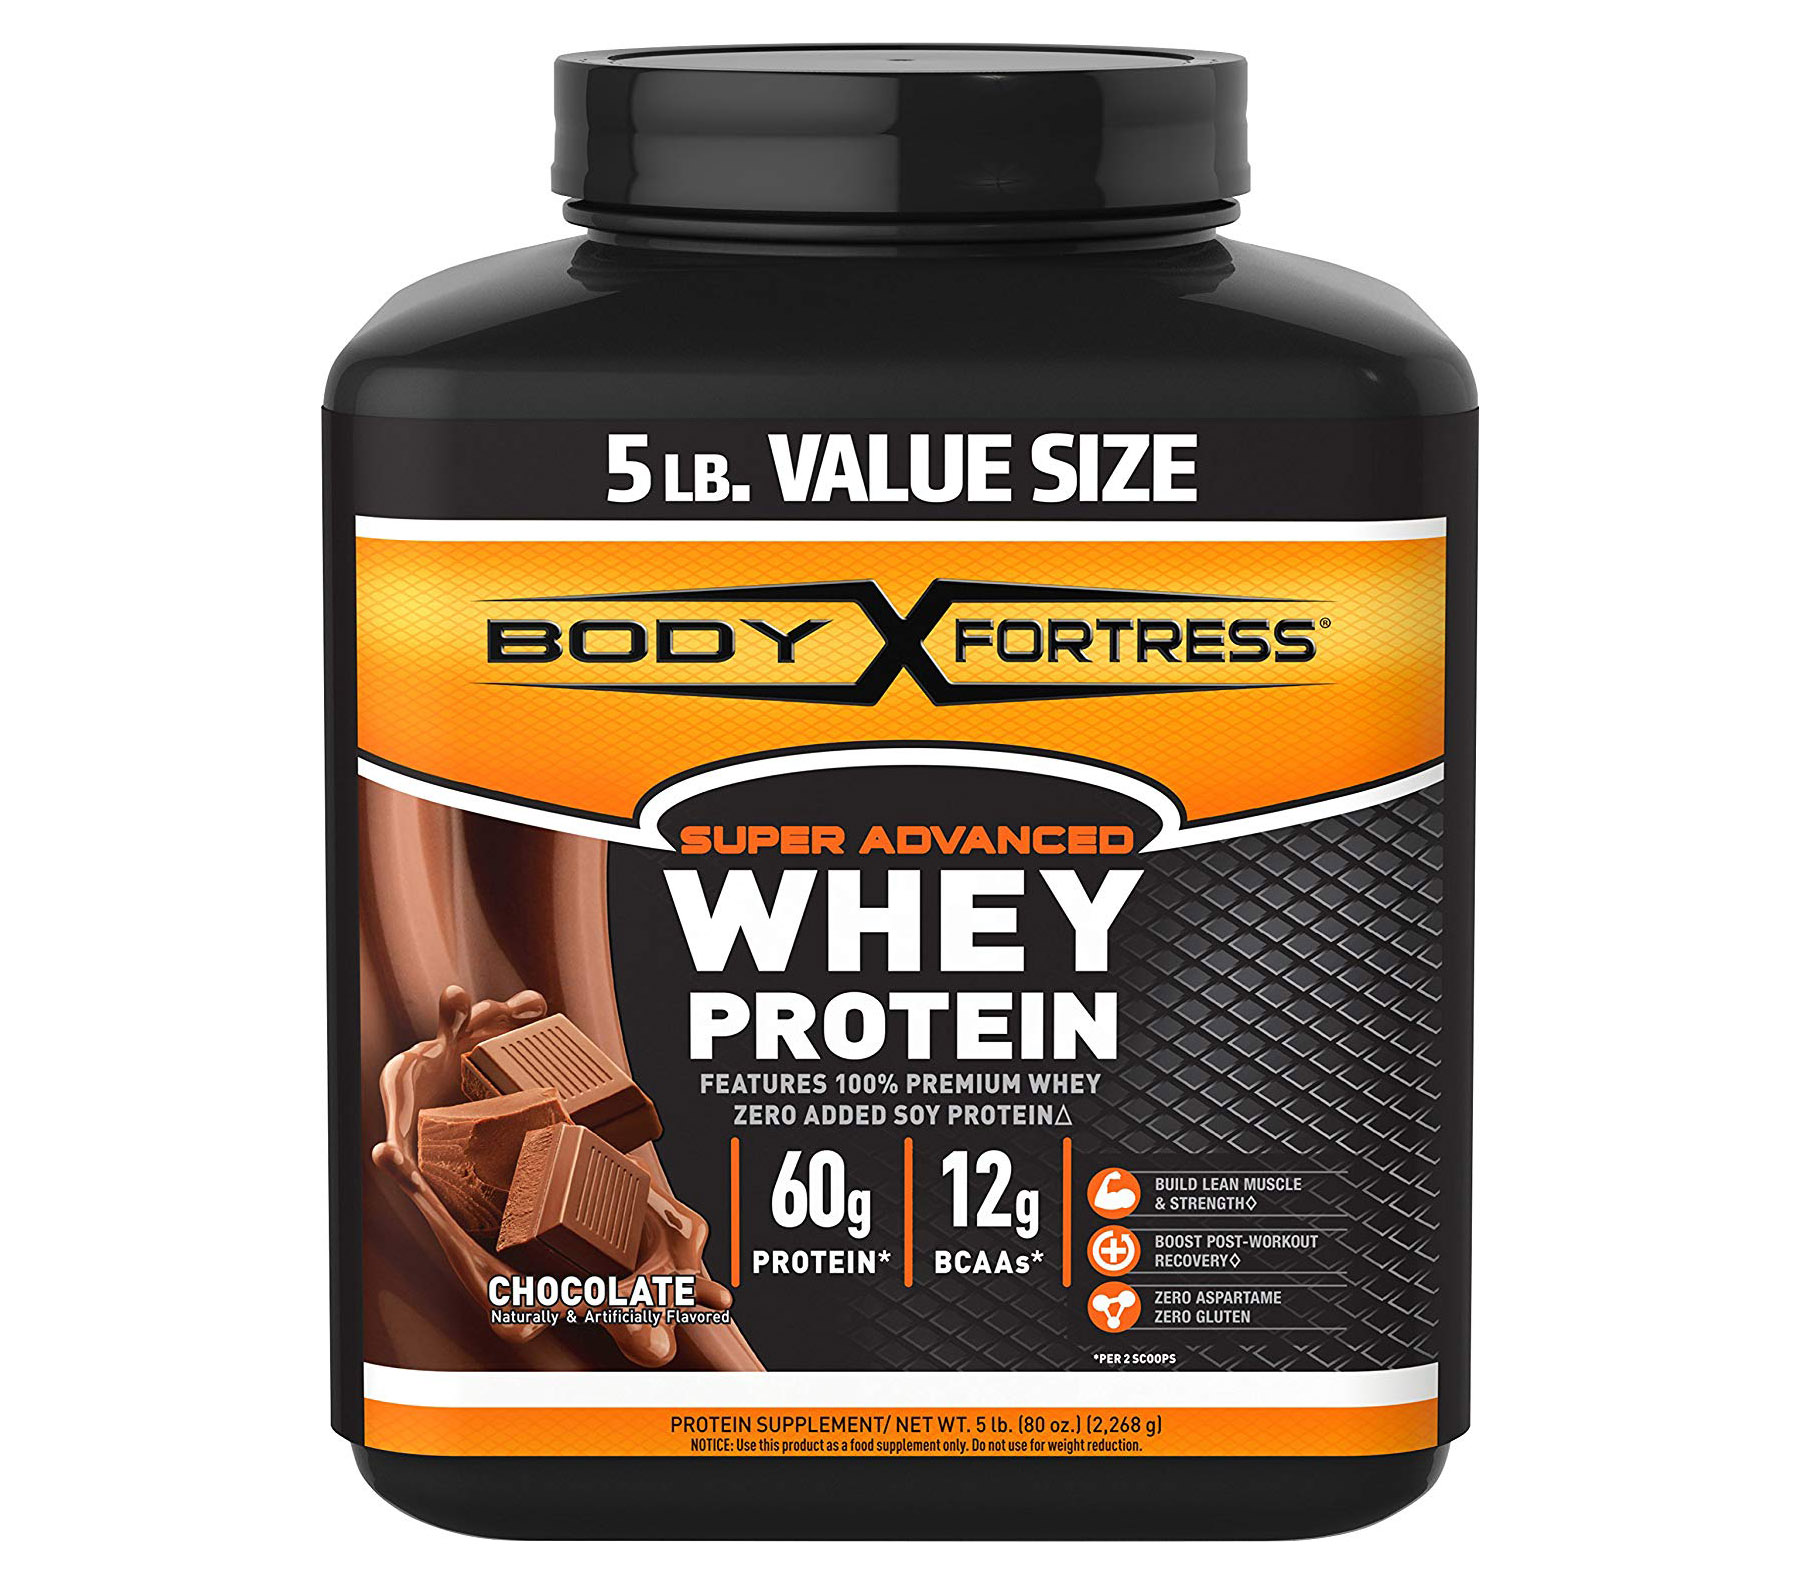 3. Protein Powders for Enhancing Muscle Growth in Females